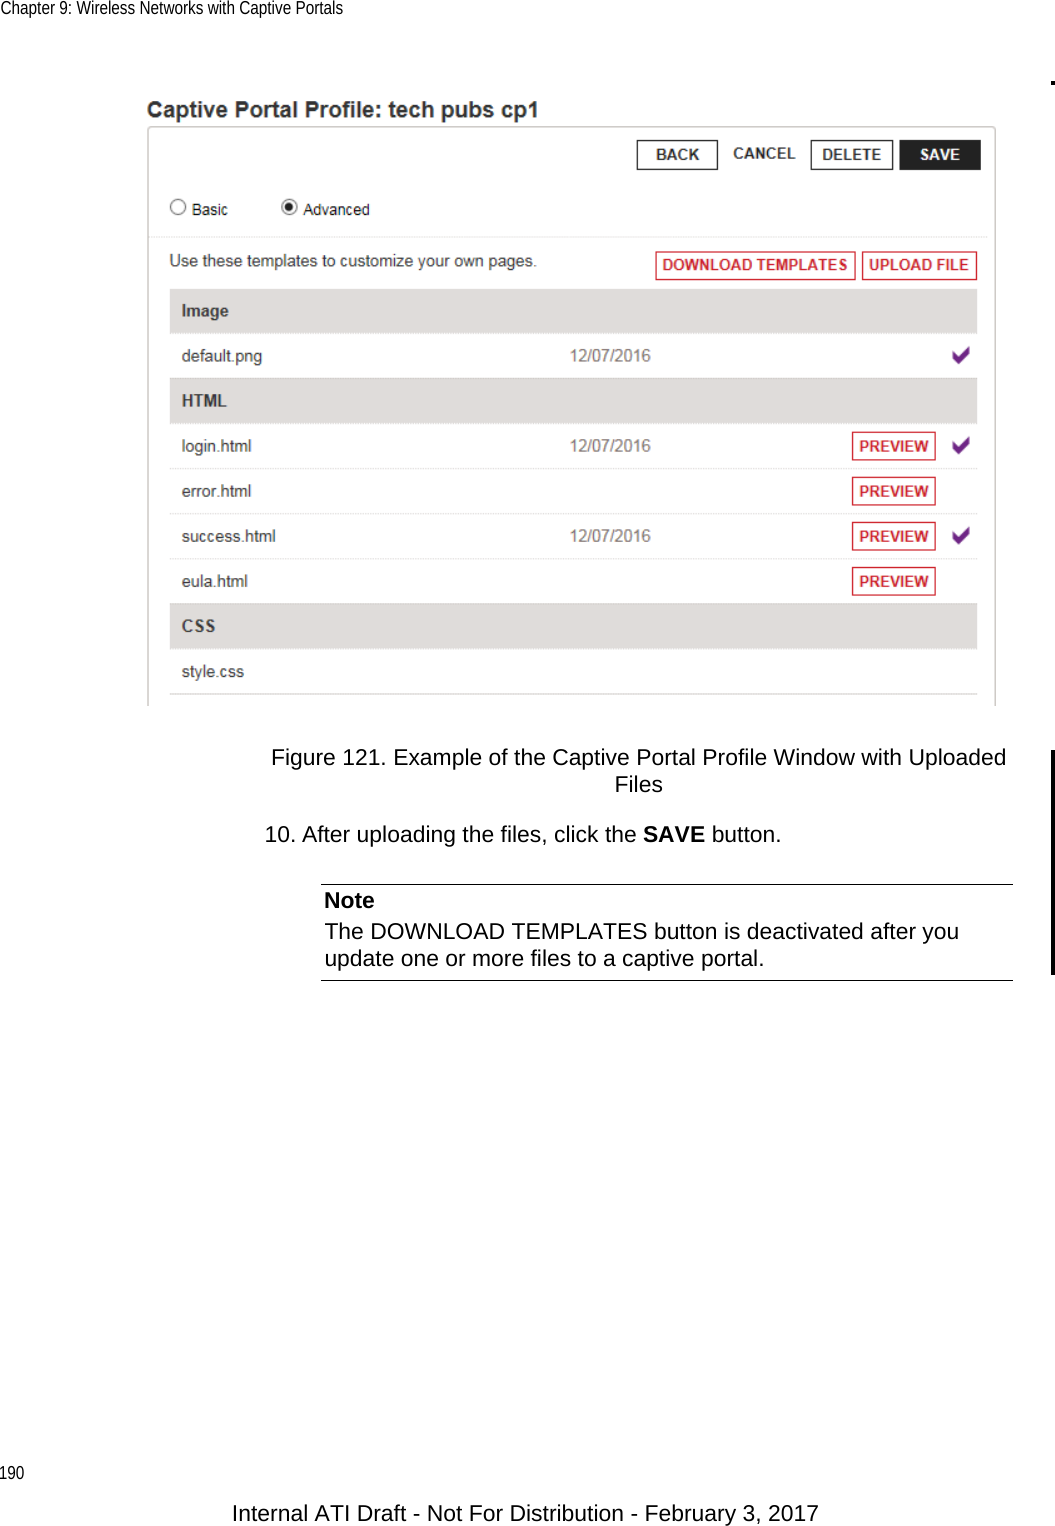 Chapter 9: Wireless Networks with Captive Portals190Figure 121. Example of the Captive Portal Profile Window with Uploaded Files10. After uploading the files, click the SAVE button.NoteThe DOWNLOAD TEMPLATES button is deactivated after you update one or more files to a captive portal.Internal ATI Draft - Not For Distribution - February 3, 2017